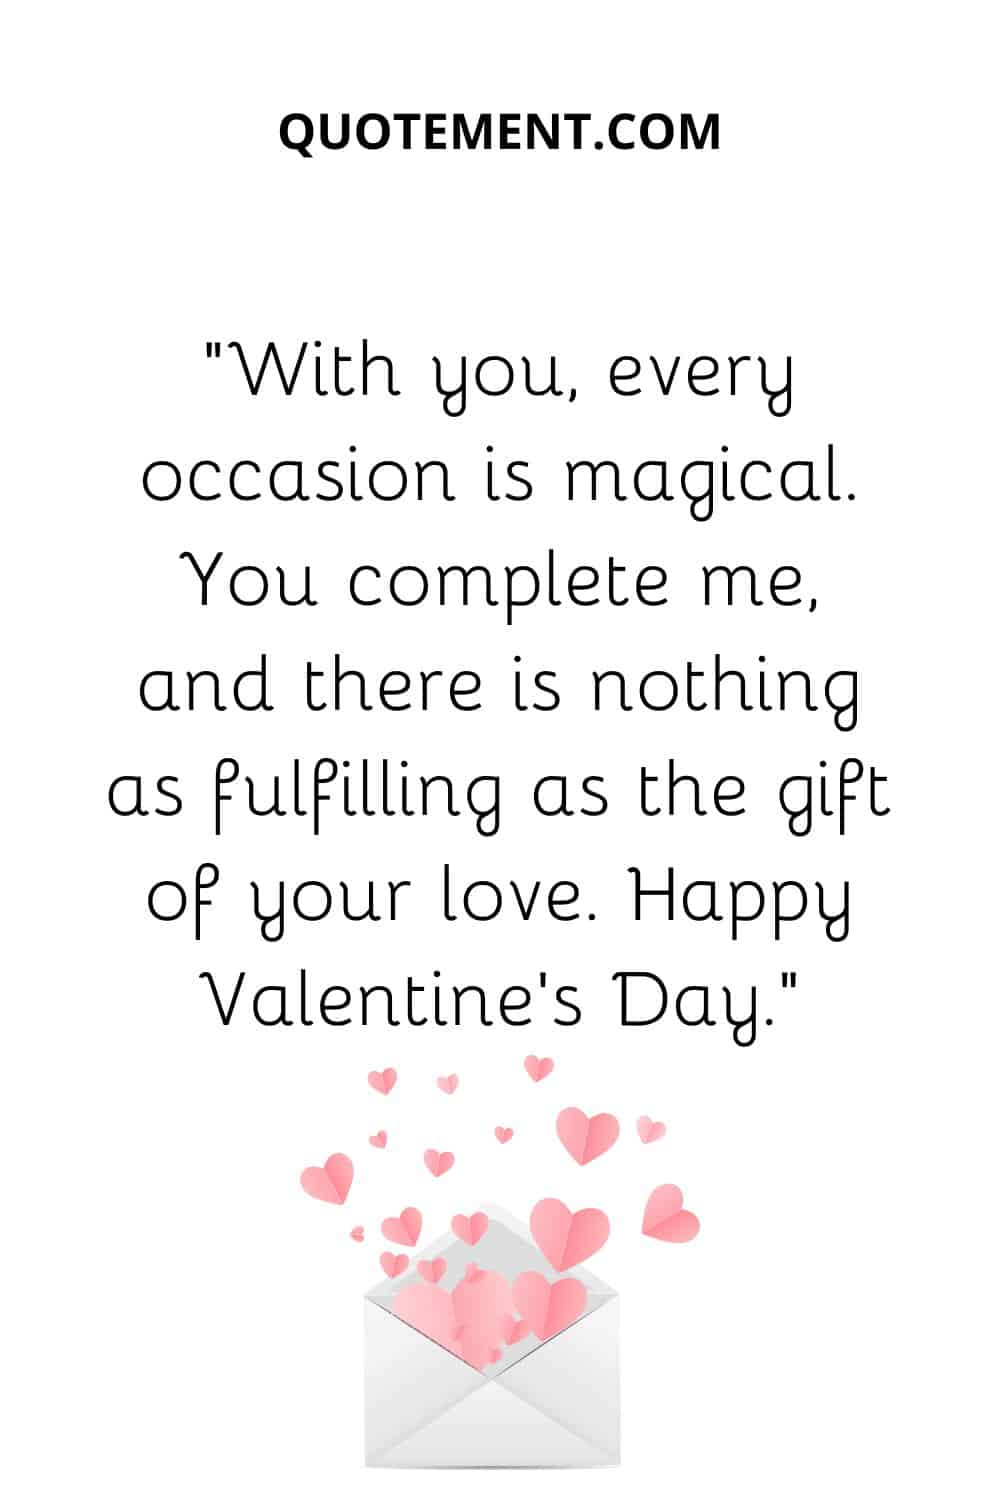 “With you, every occasion is magical. You complete me, and there is nothing as fulfilling as the gift of your love. Happy Valentine’s Day.”